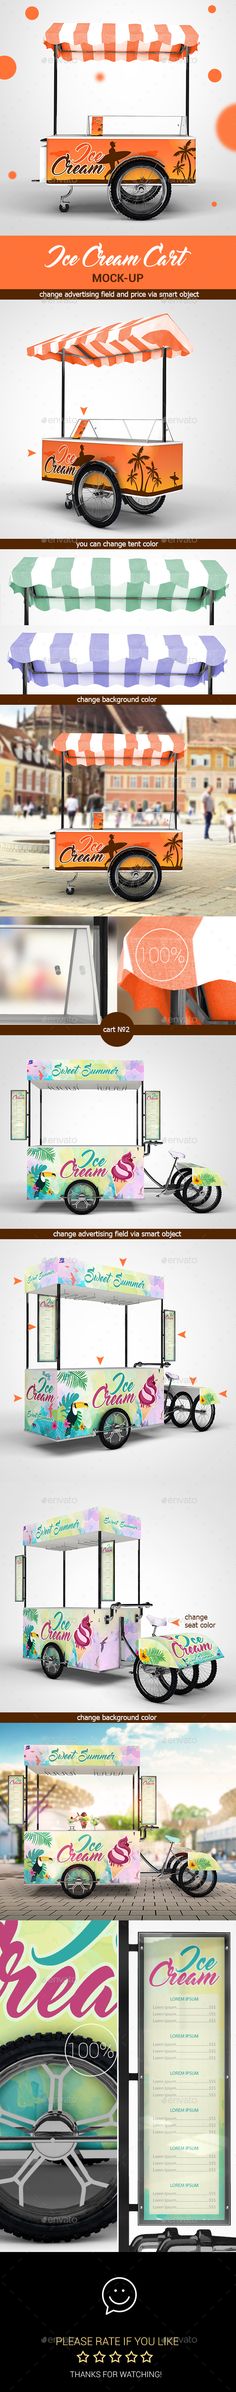 Graphicriver ice cream cart mock-up 17215731 download free download